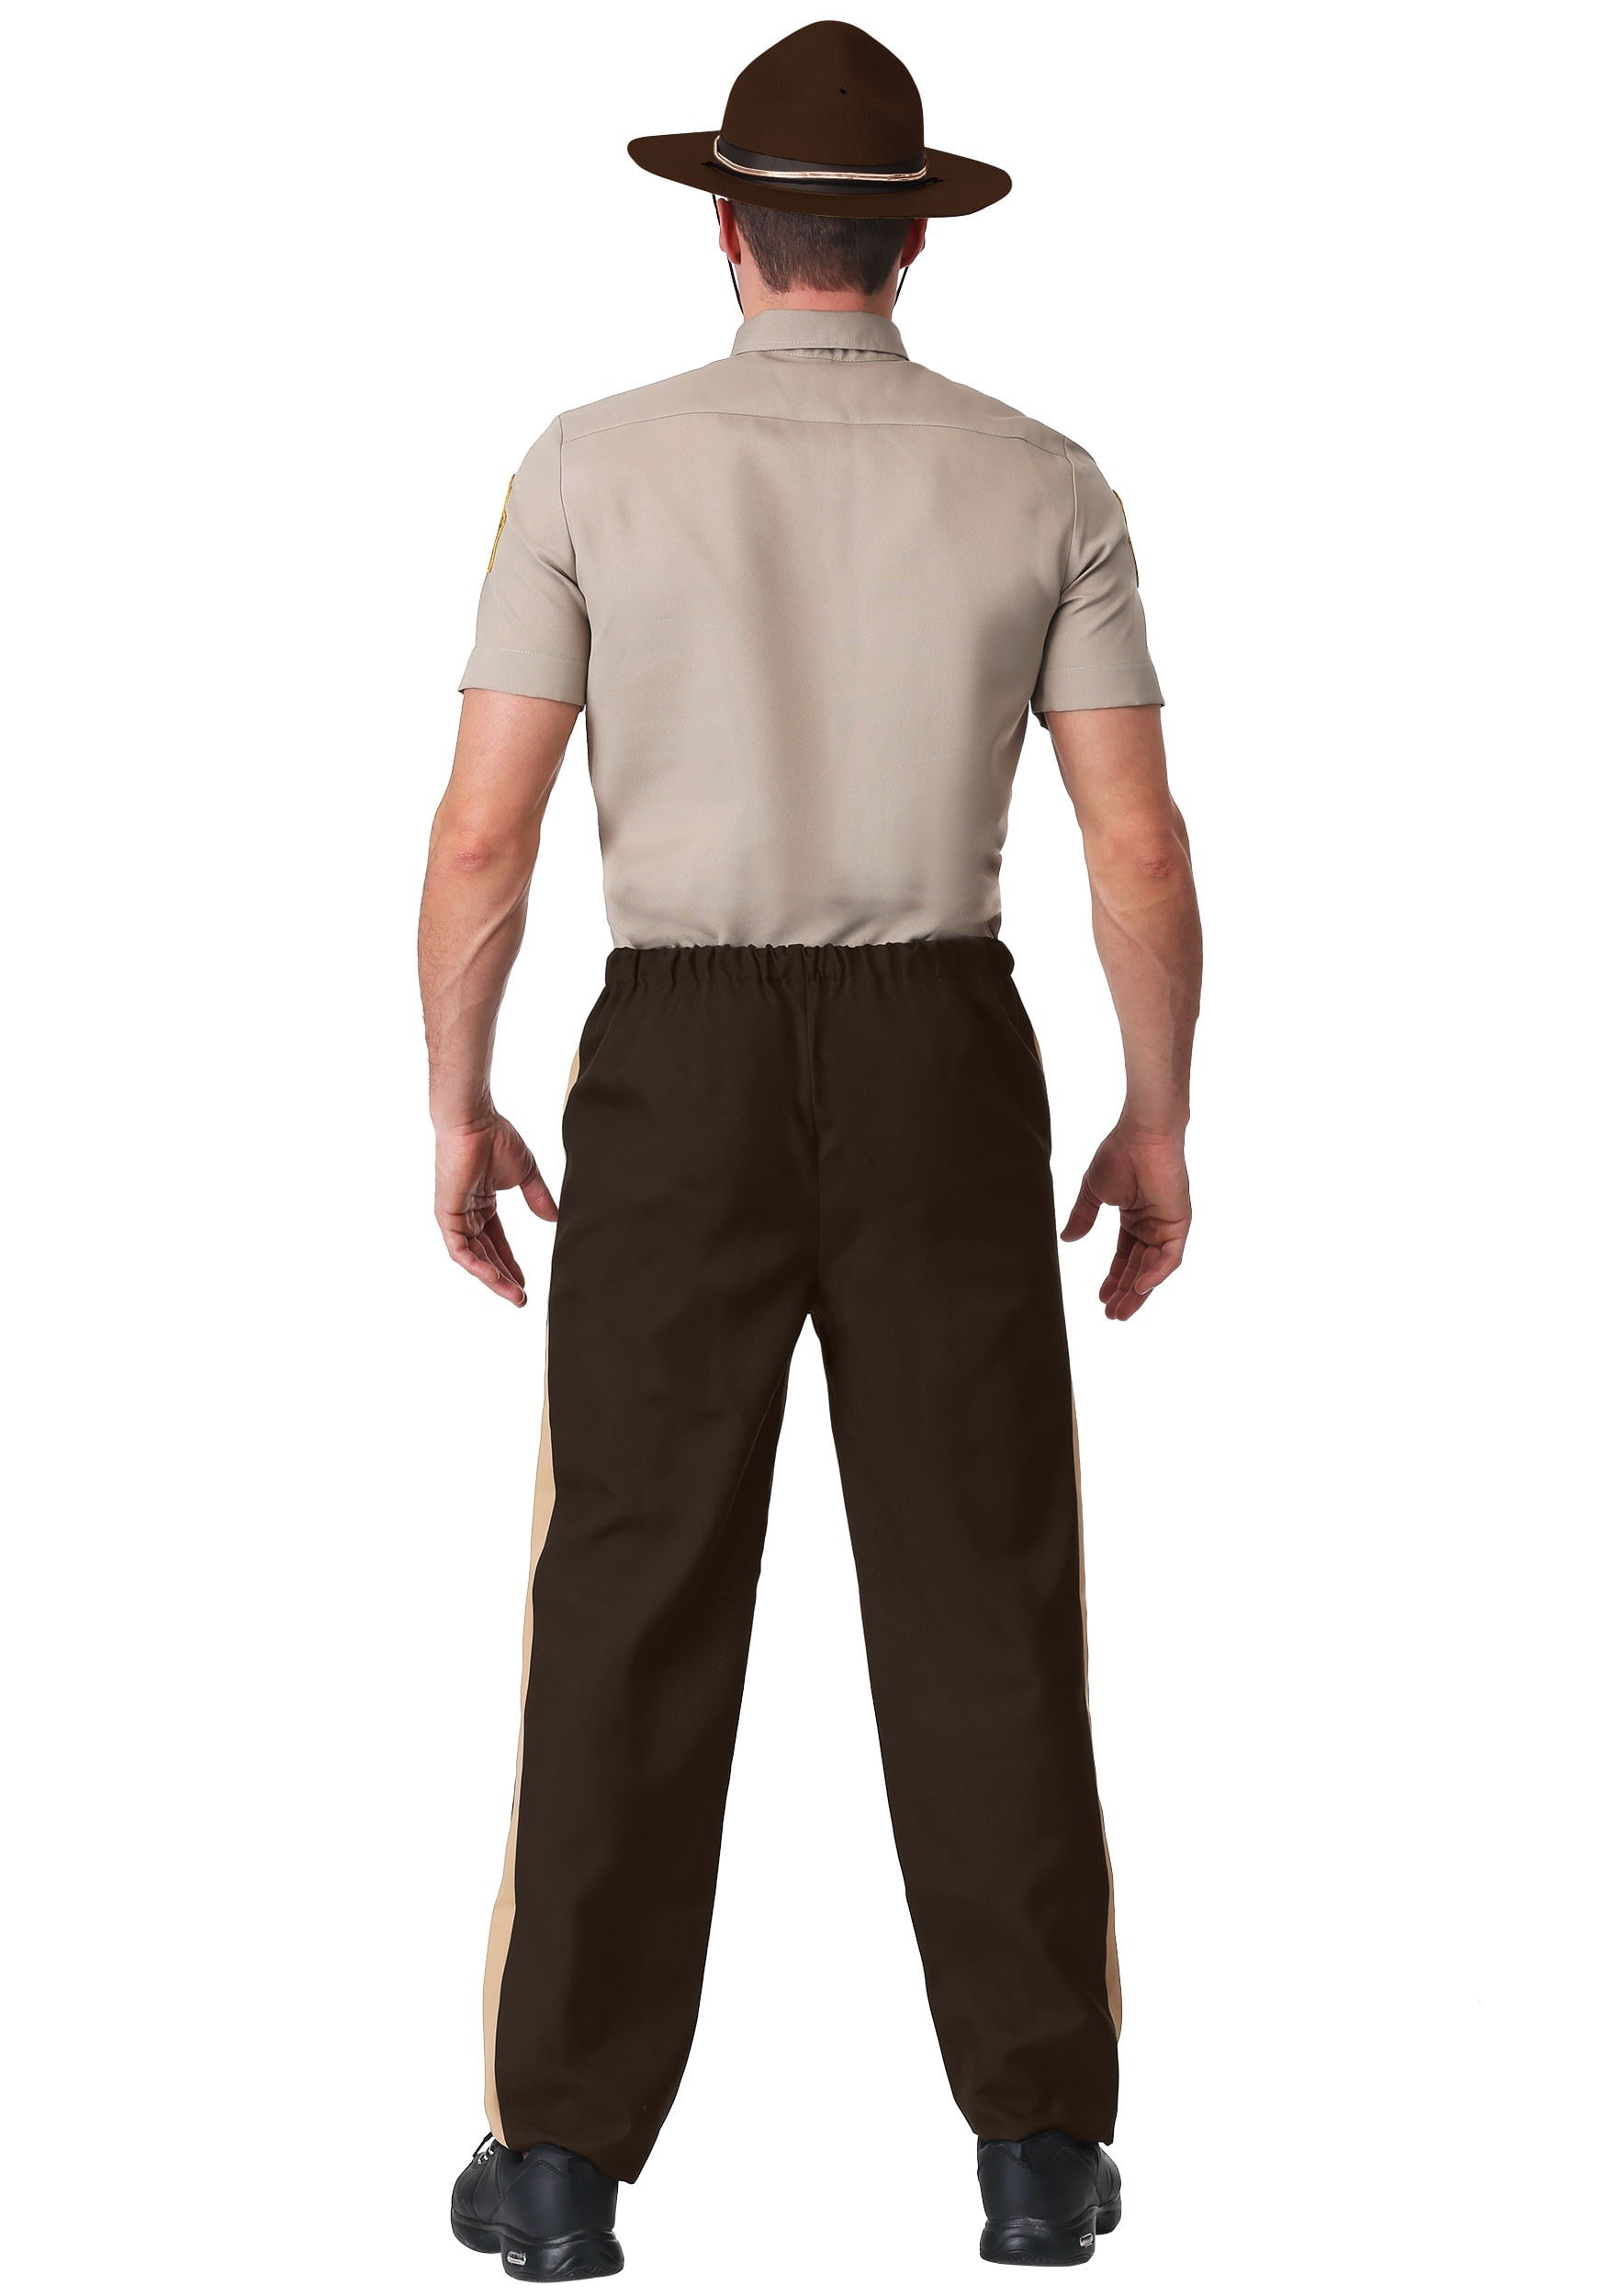 Details about  / State Trooper Police Cop Highway Patrol Fancy Dress Up Halloween Adult Costume